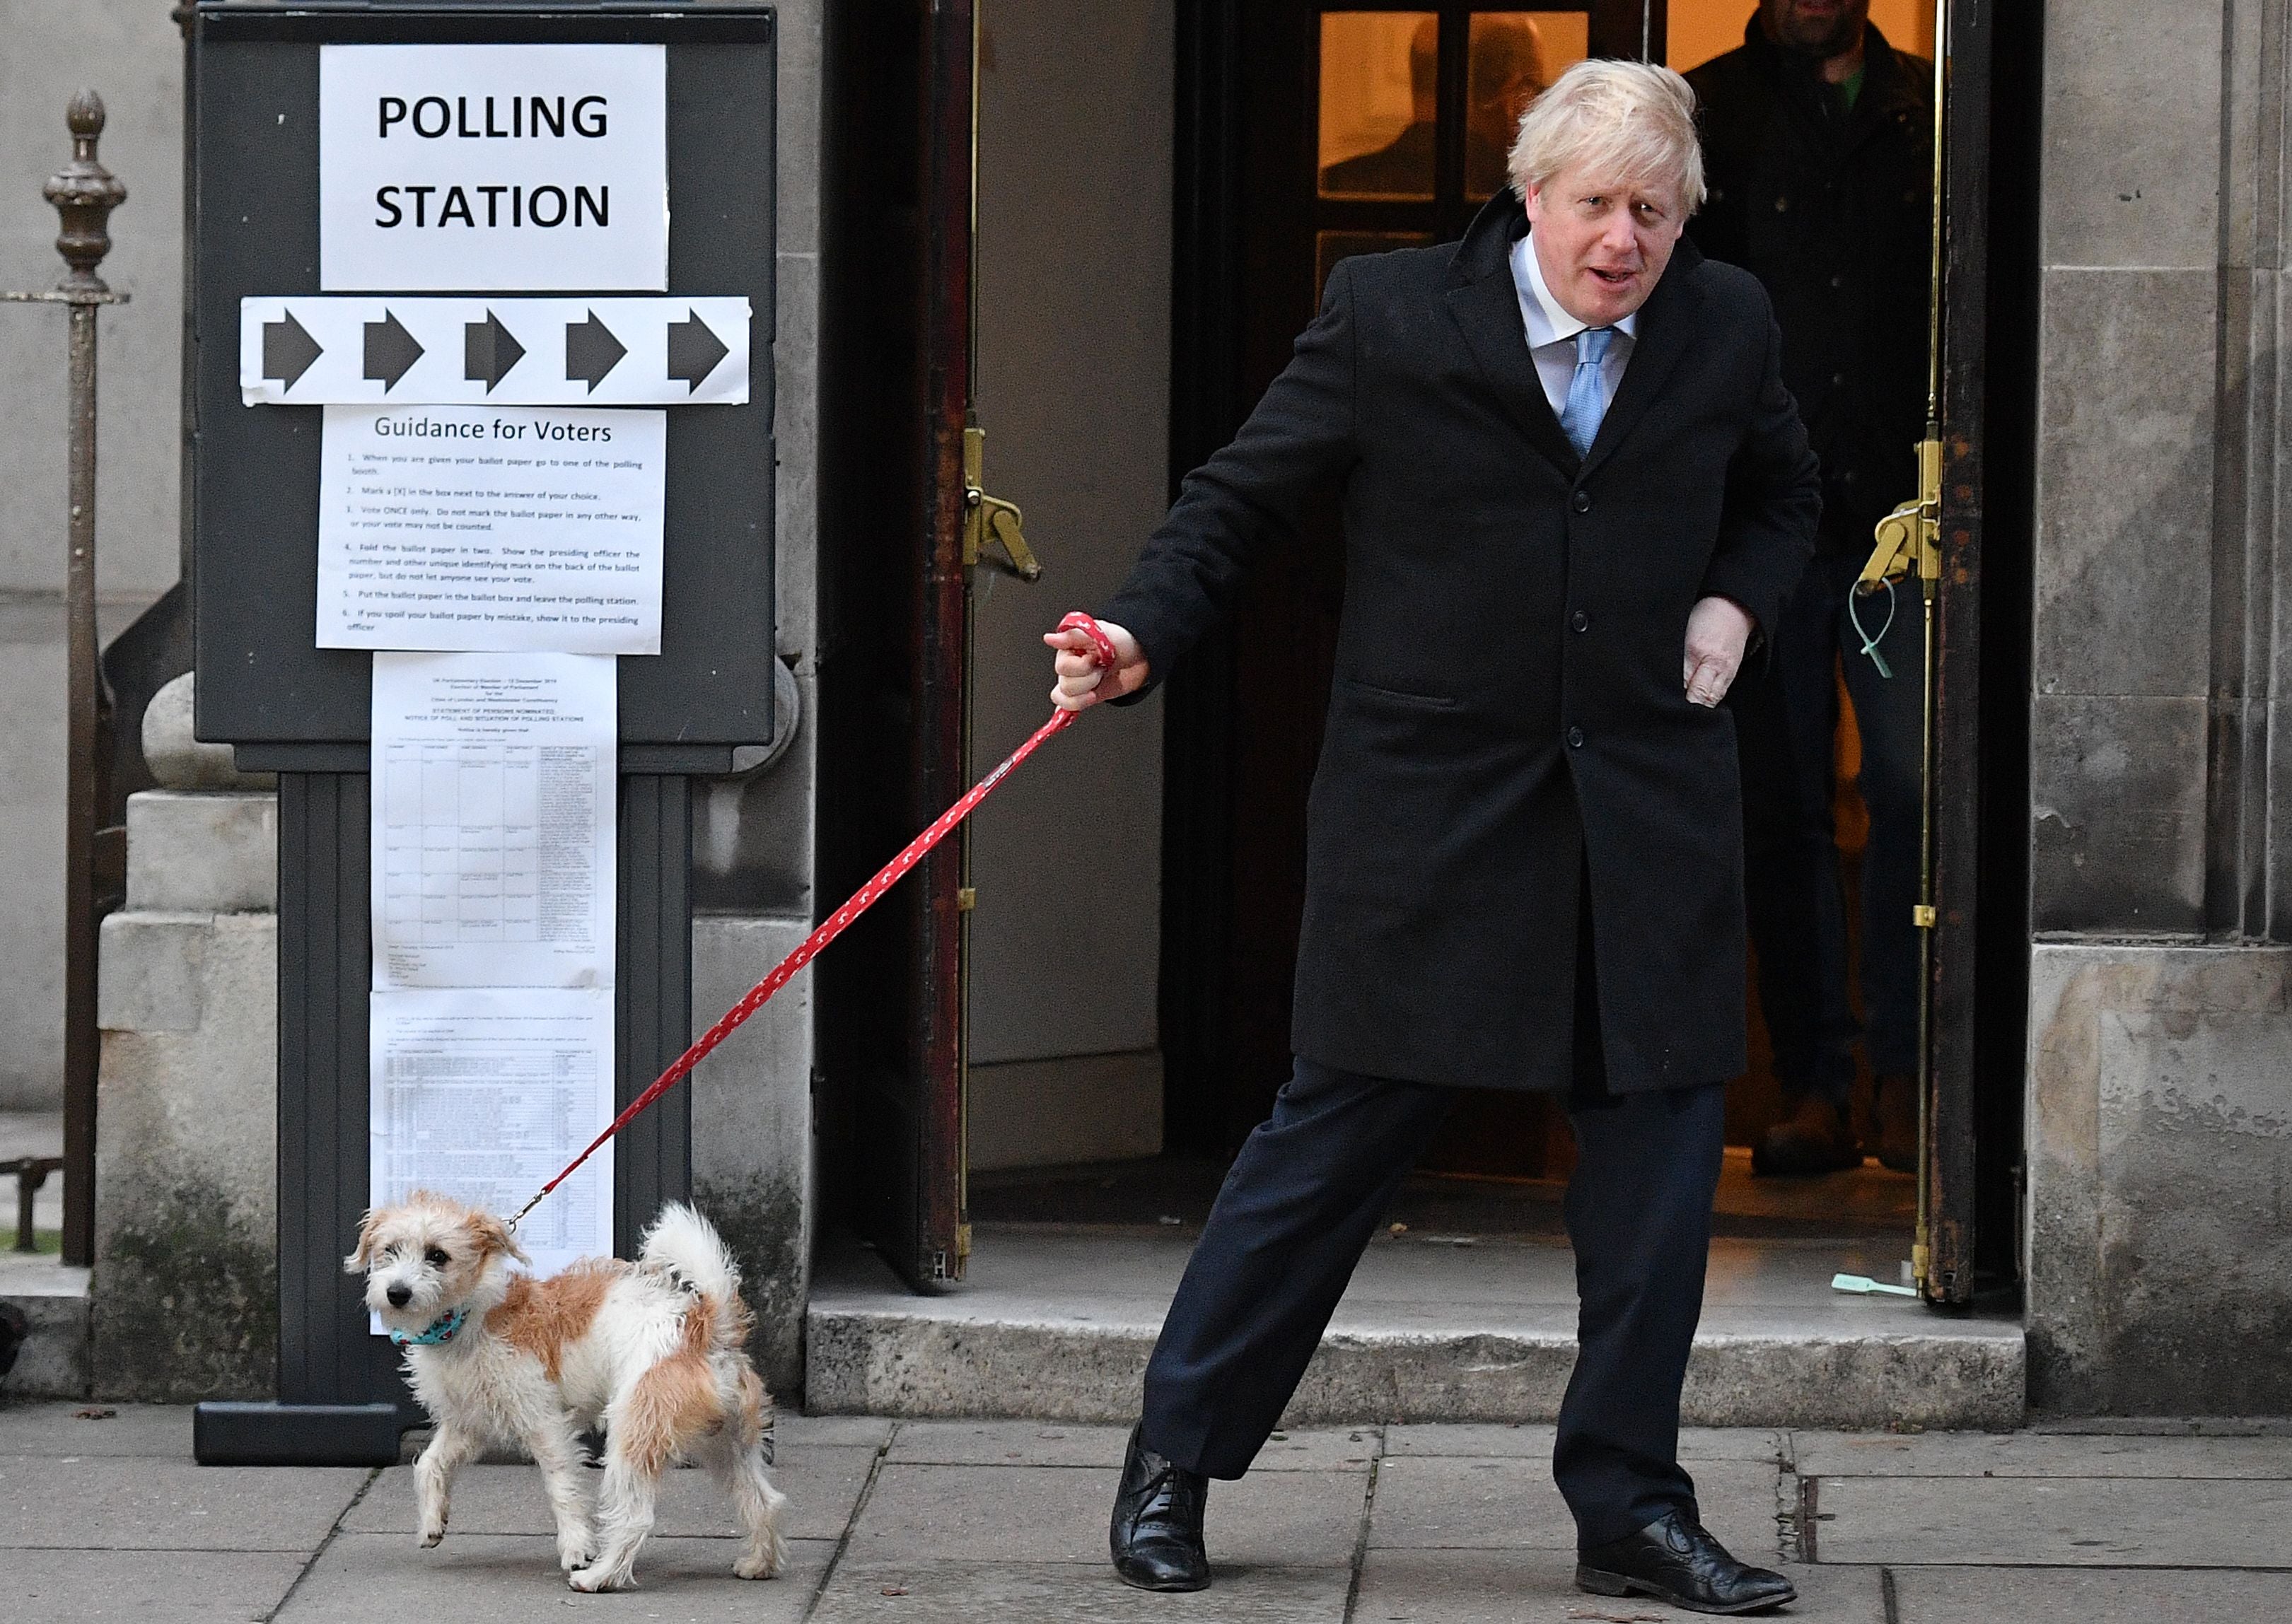 Boris Johnson and his dog Dilyn leave a polling station, after he cast his ballot paper, in 2019